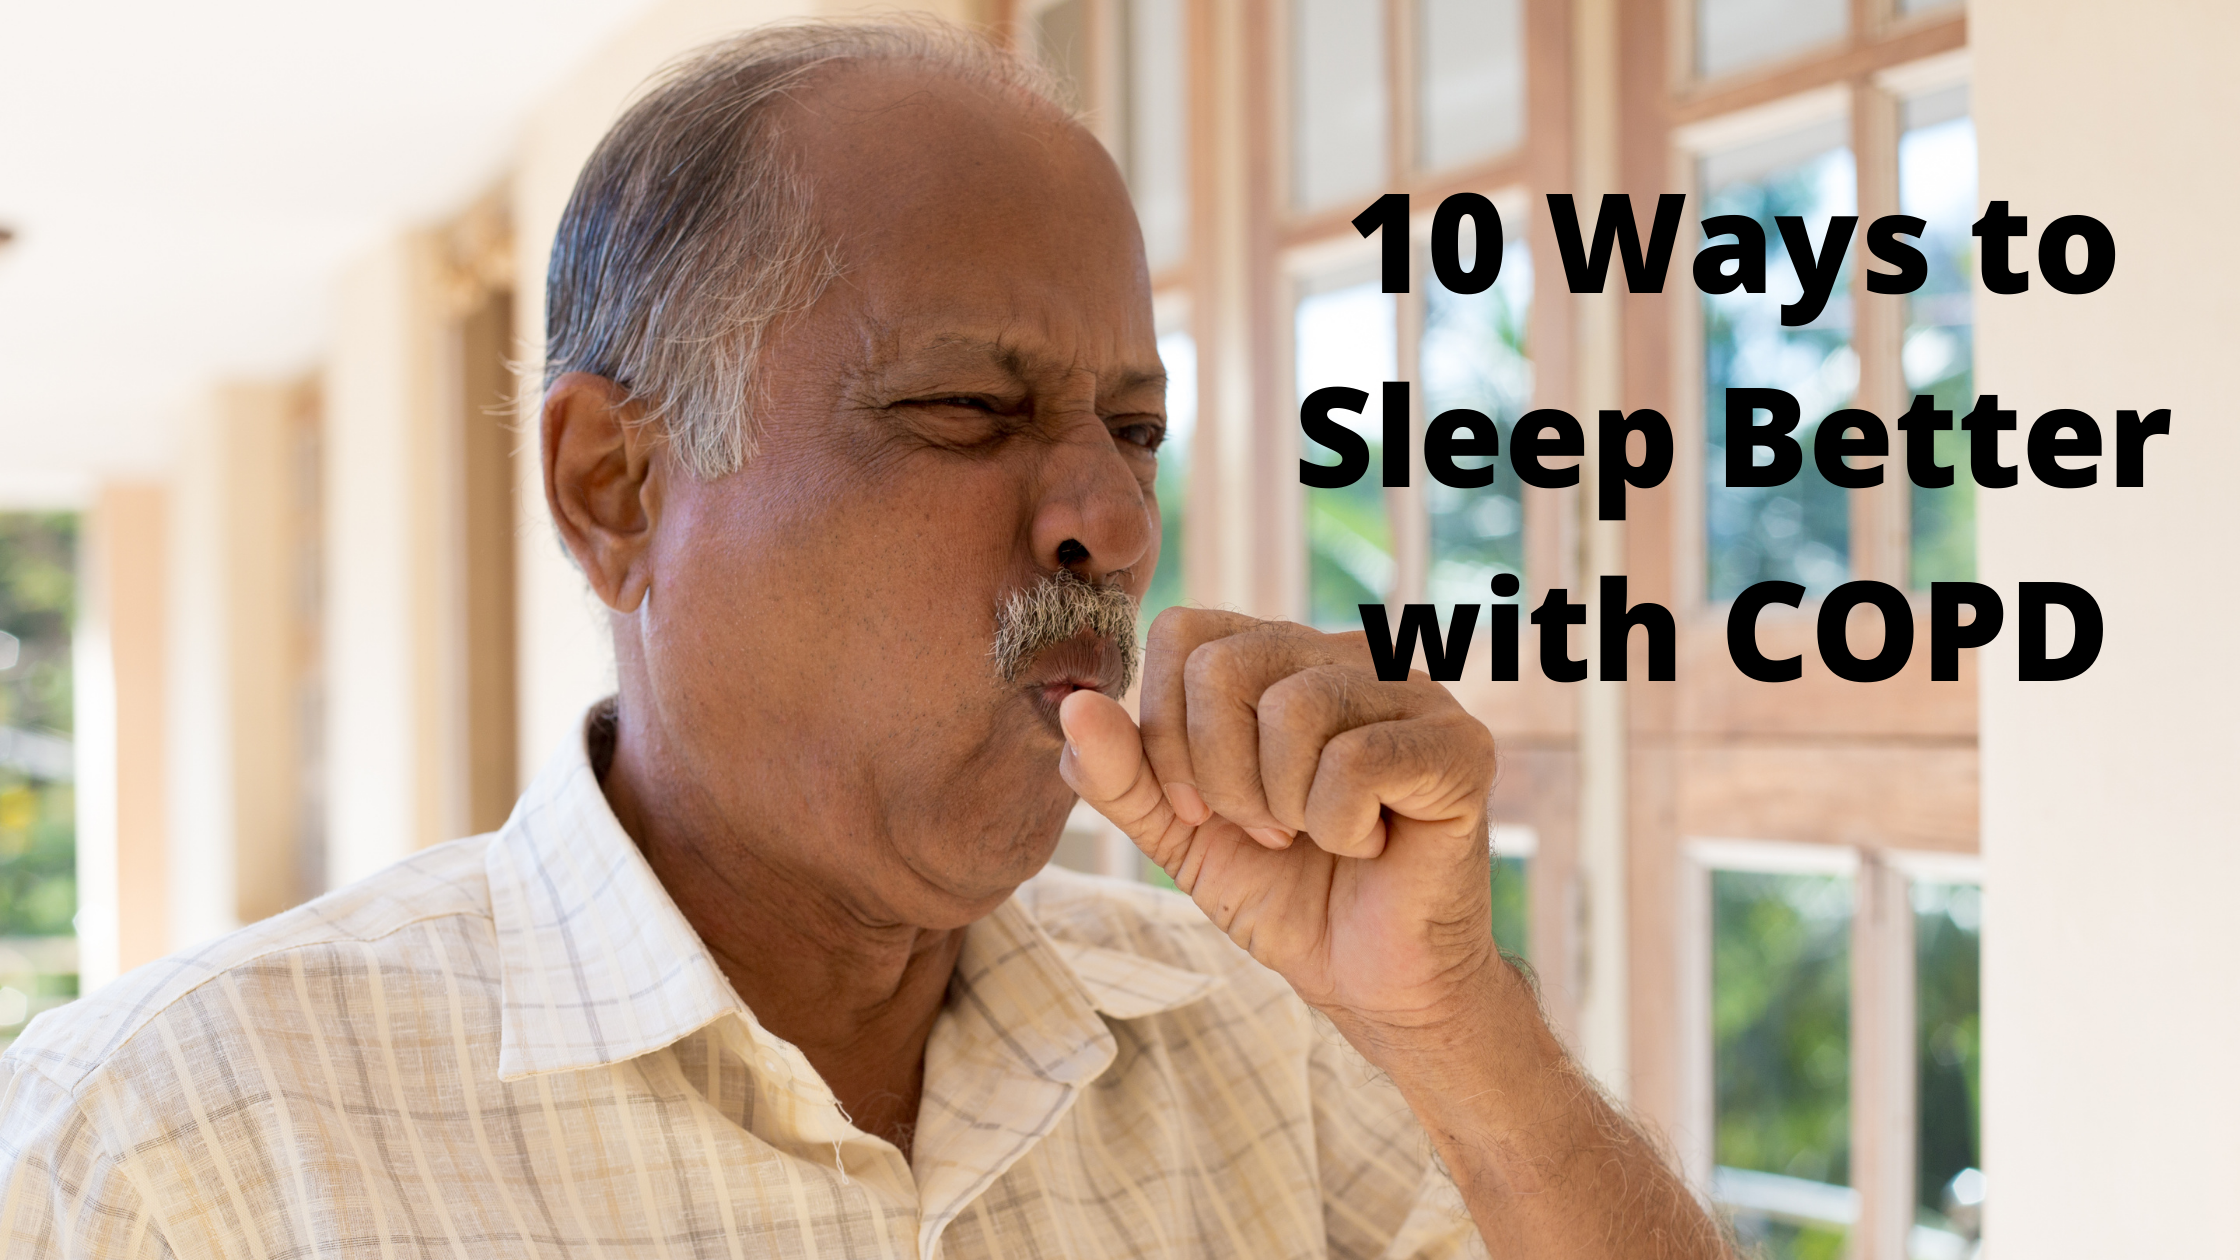 10 Ways to Sleep Better with COPD